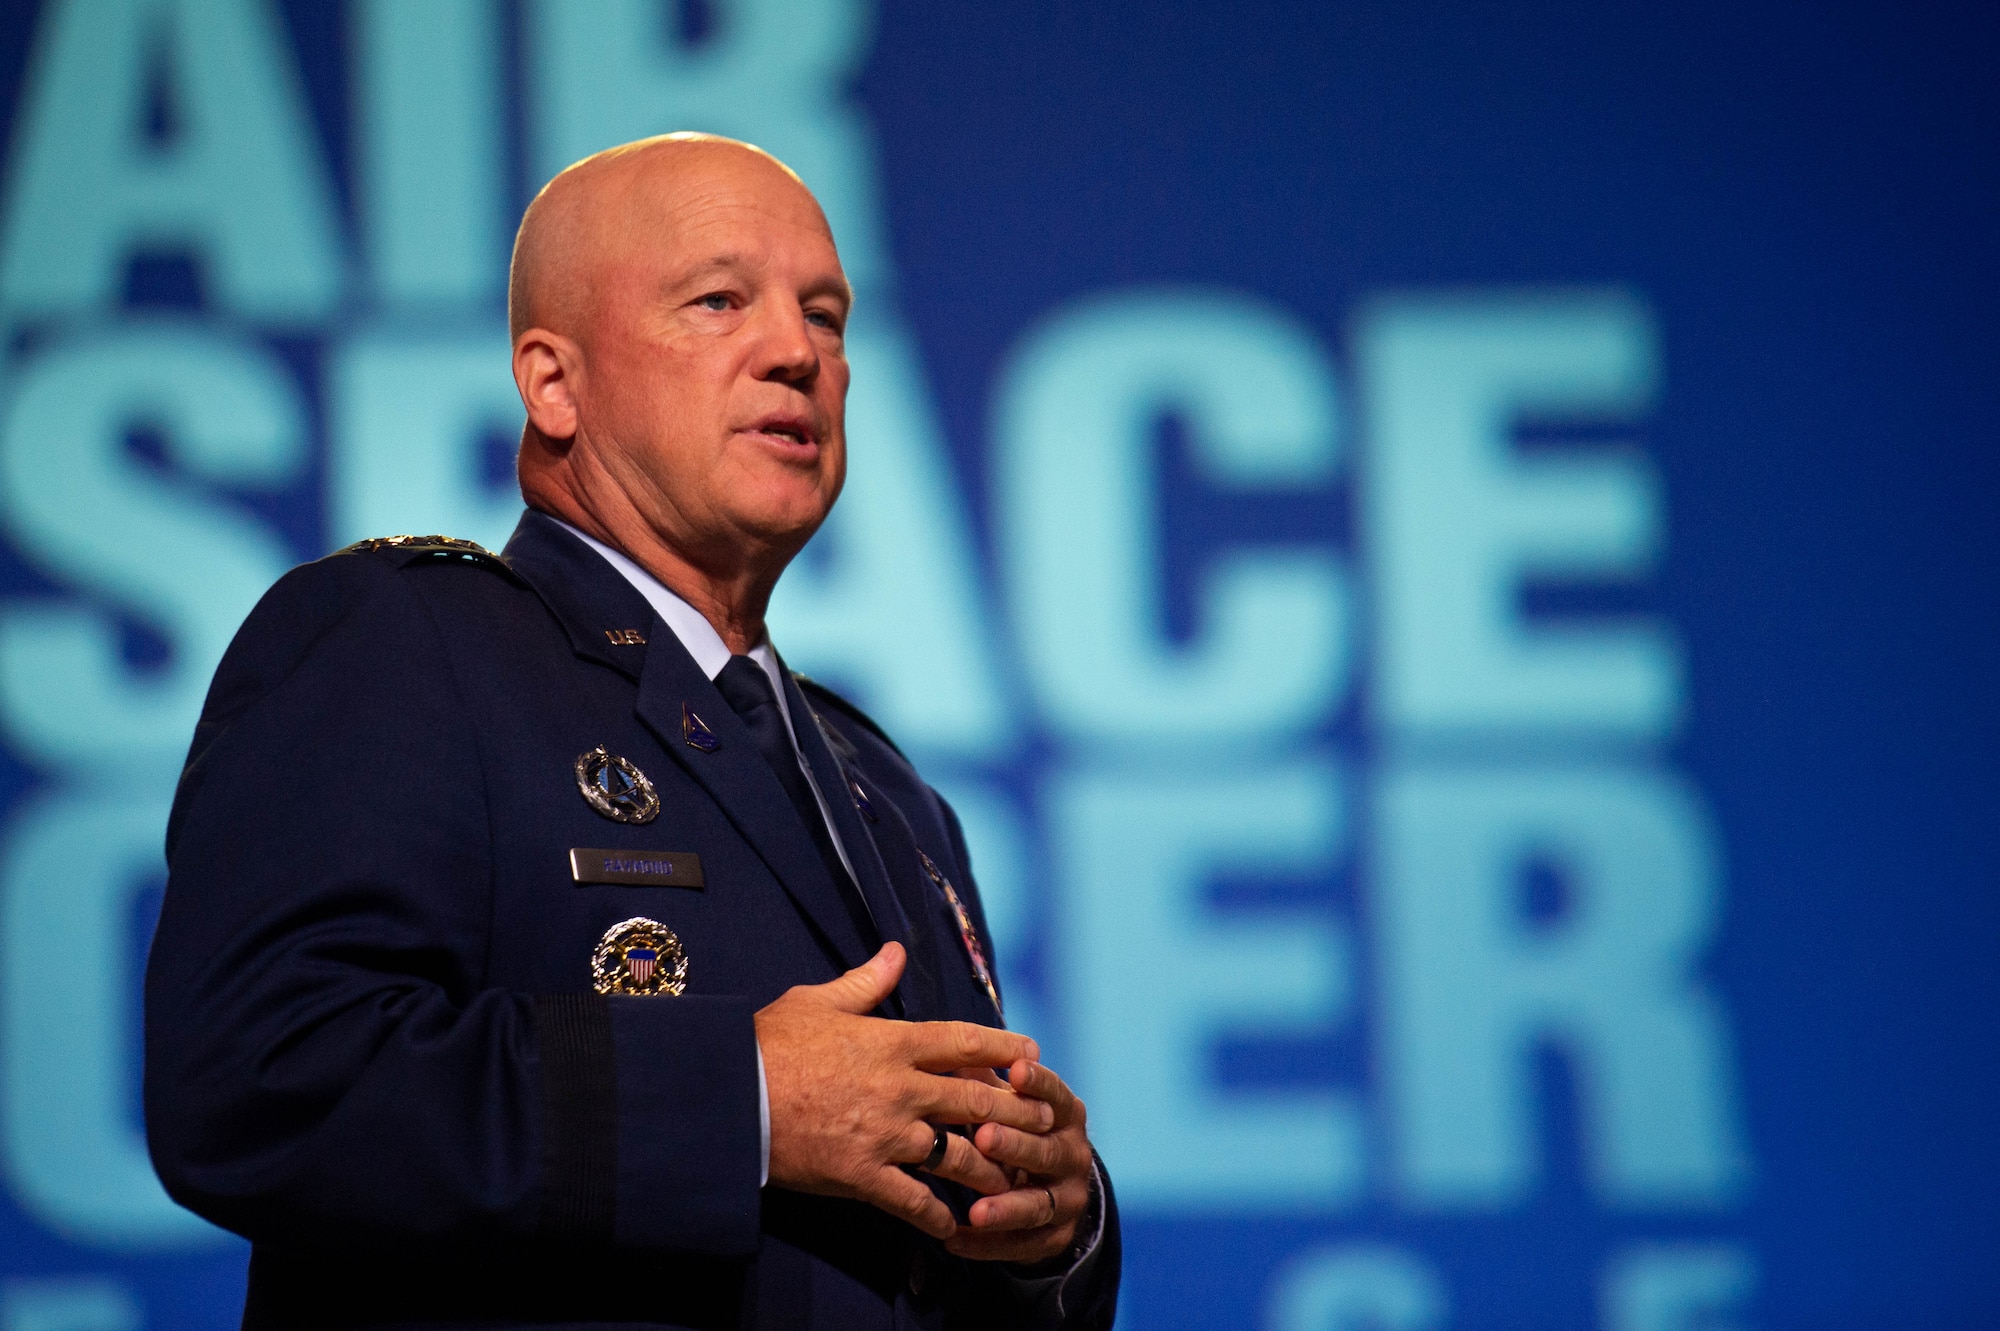 Chief of Space Force Operations Gen. John W. “Jay” Raymond gives an update on the U.S. Space Force during the Air Force Association Air, Space and Cyber Conference at National Harbor, Md., Sept. 21, 2021. During his presentation, Raymond previewed the Space Force’s Service Dress Prototype and gave insight to the “Guardian Ideals,” which identifies the Space Forces’s vision for its culture to ensure mission success. (U.S. Air Force photo by Tech. Sgt. Areca T. Wilson)